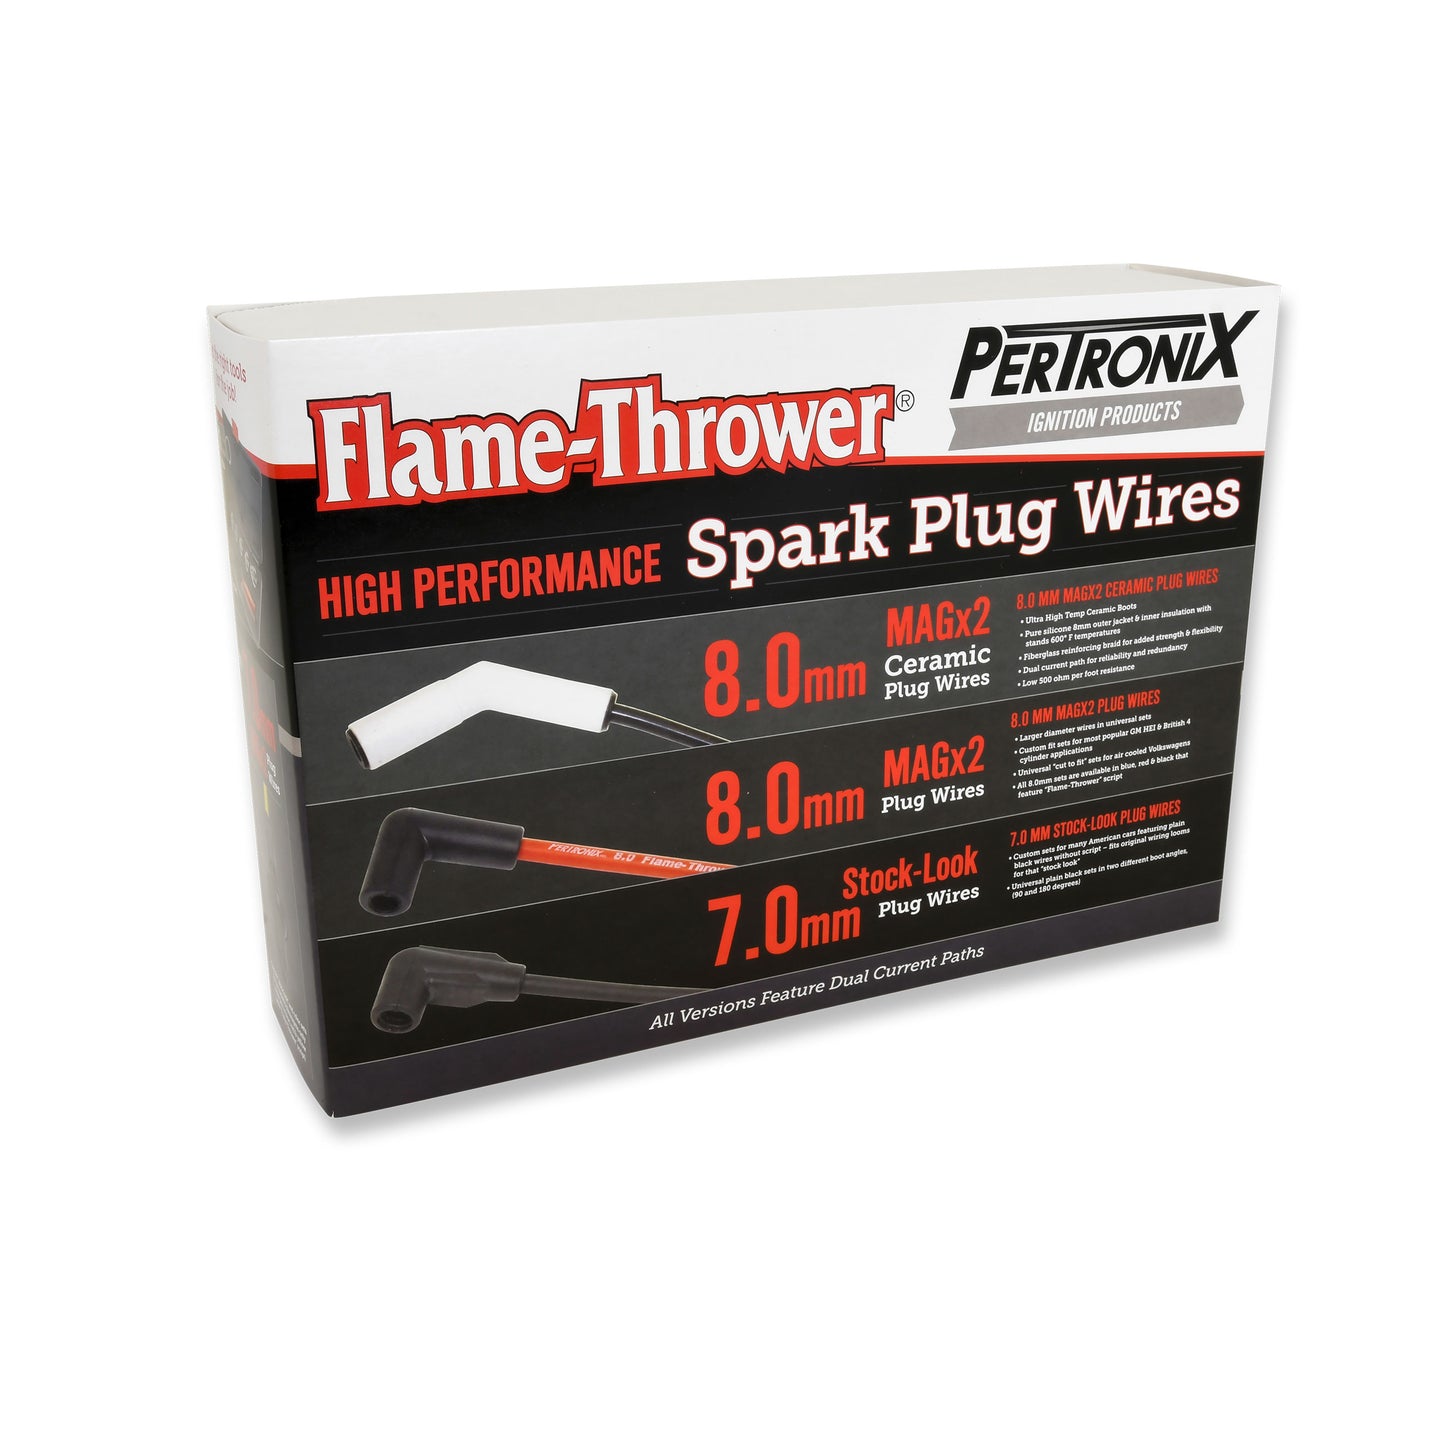 PerTronix 808224 Flame-Thrower Spark Plug Wires 8 cyl 8mm 45 Degree Boots Black